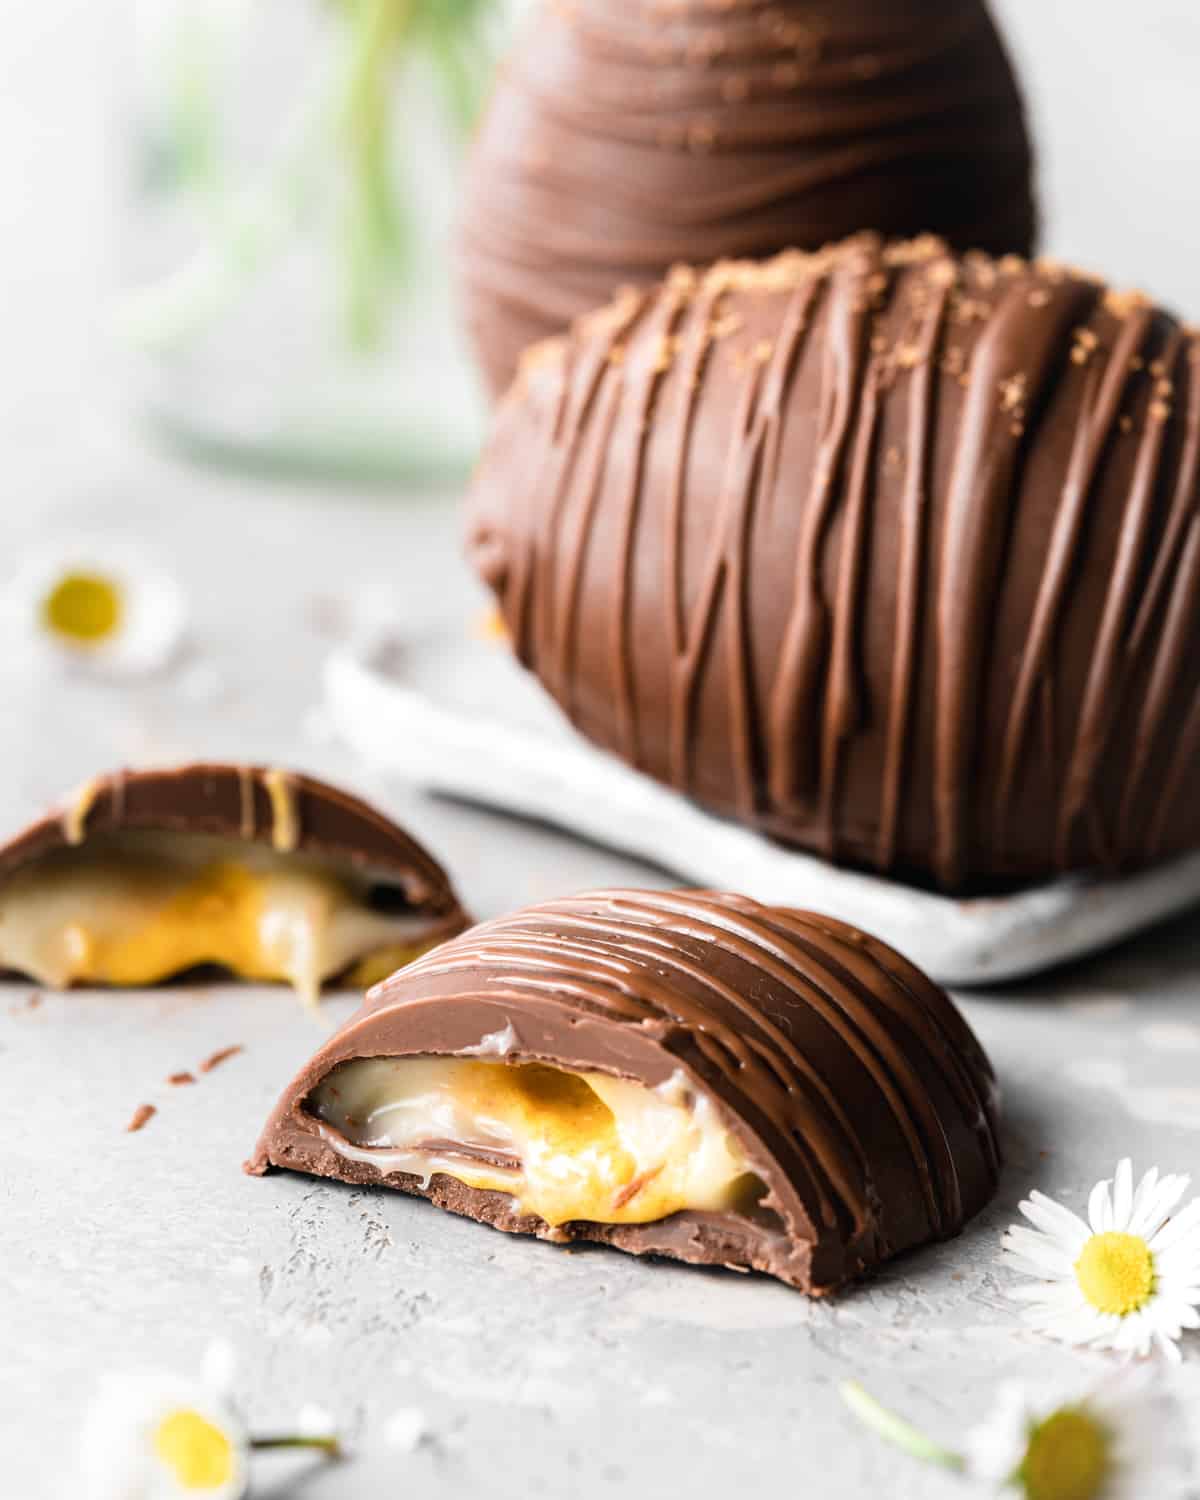 giant creme egg cut in half with daisies in the foreground.